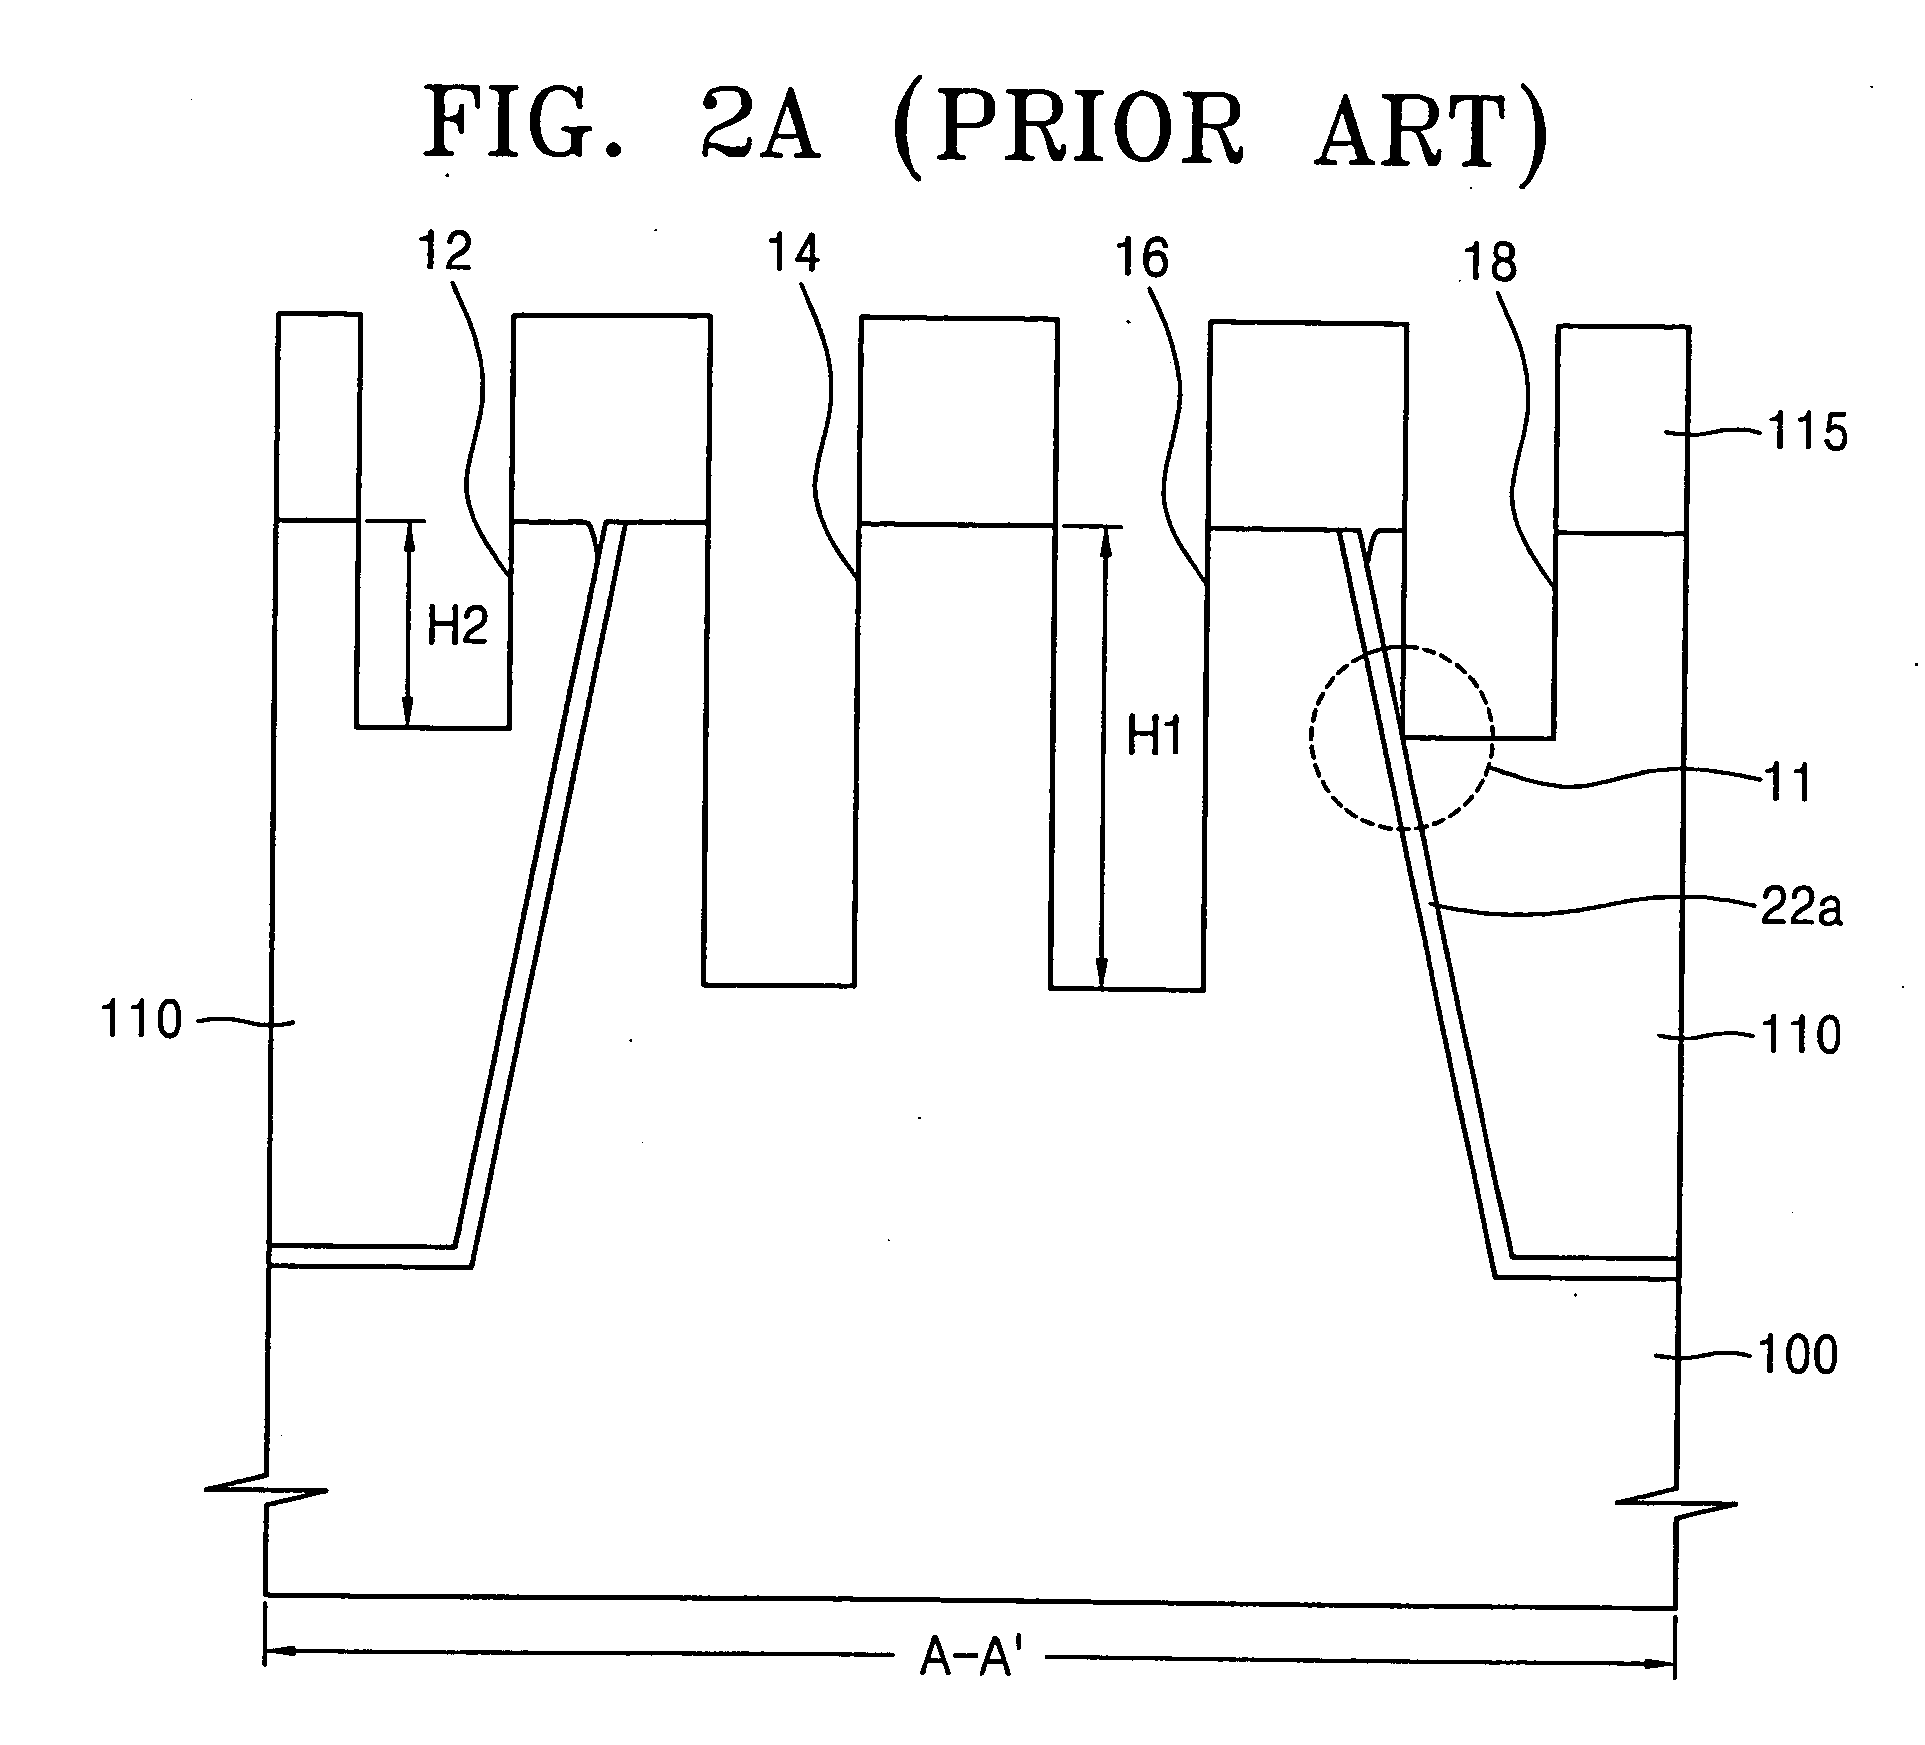 Method of forming a recess channel trench pattern, and fabricating a recess channel transistor